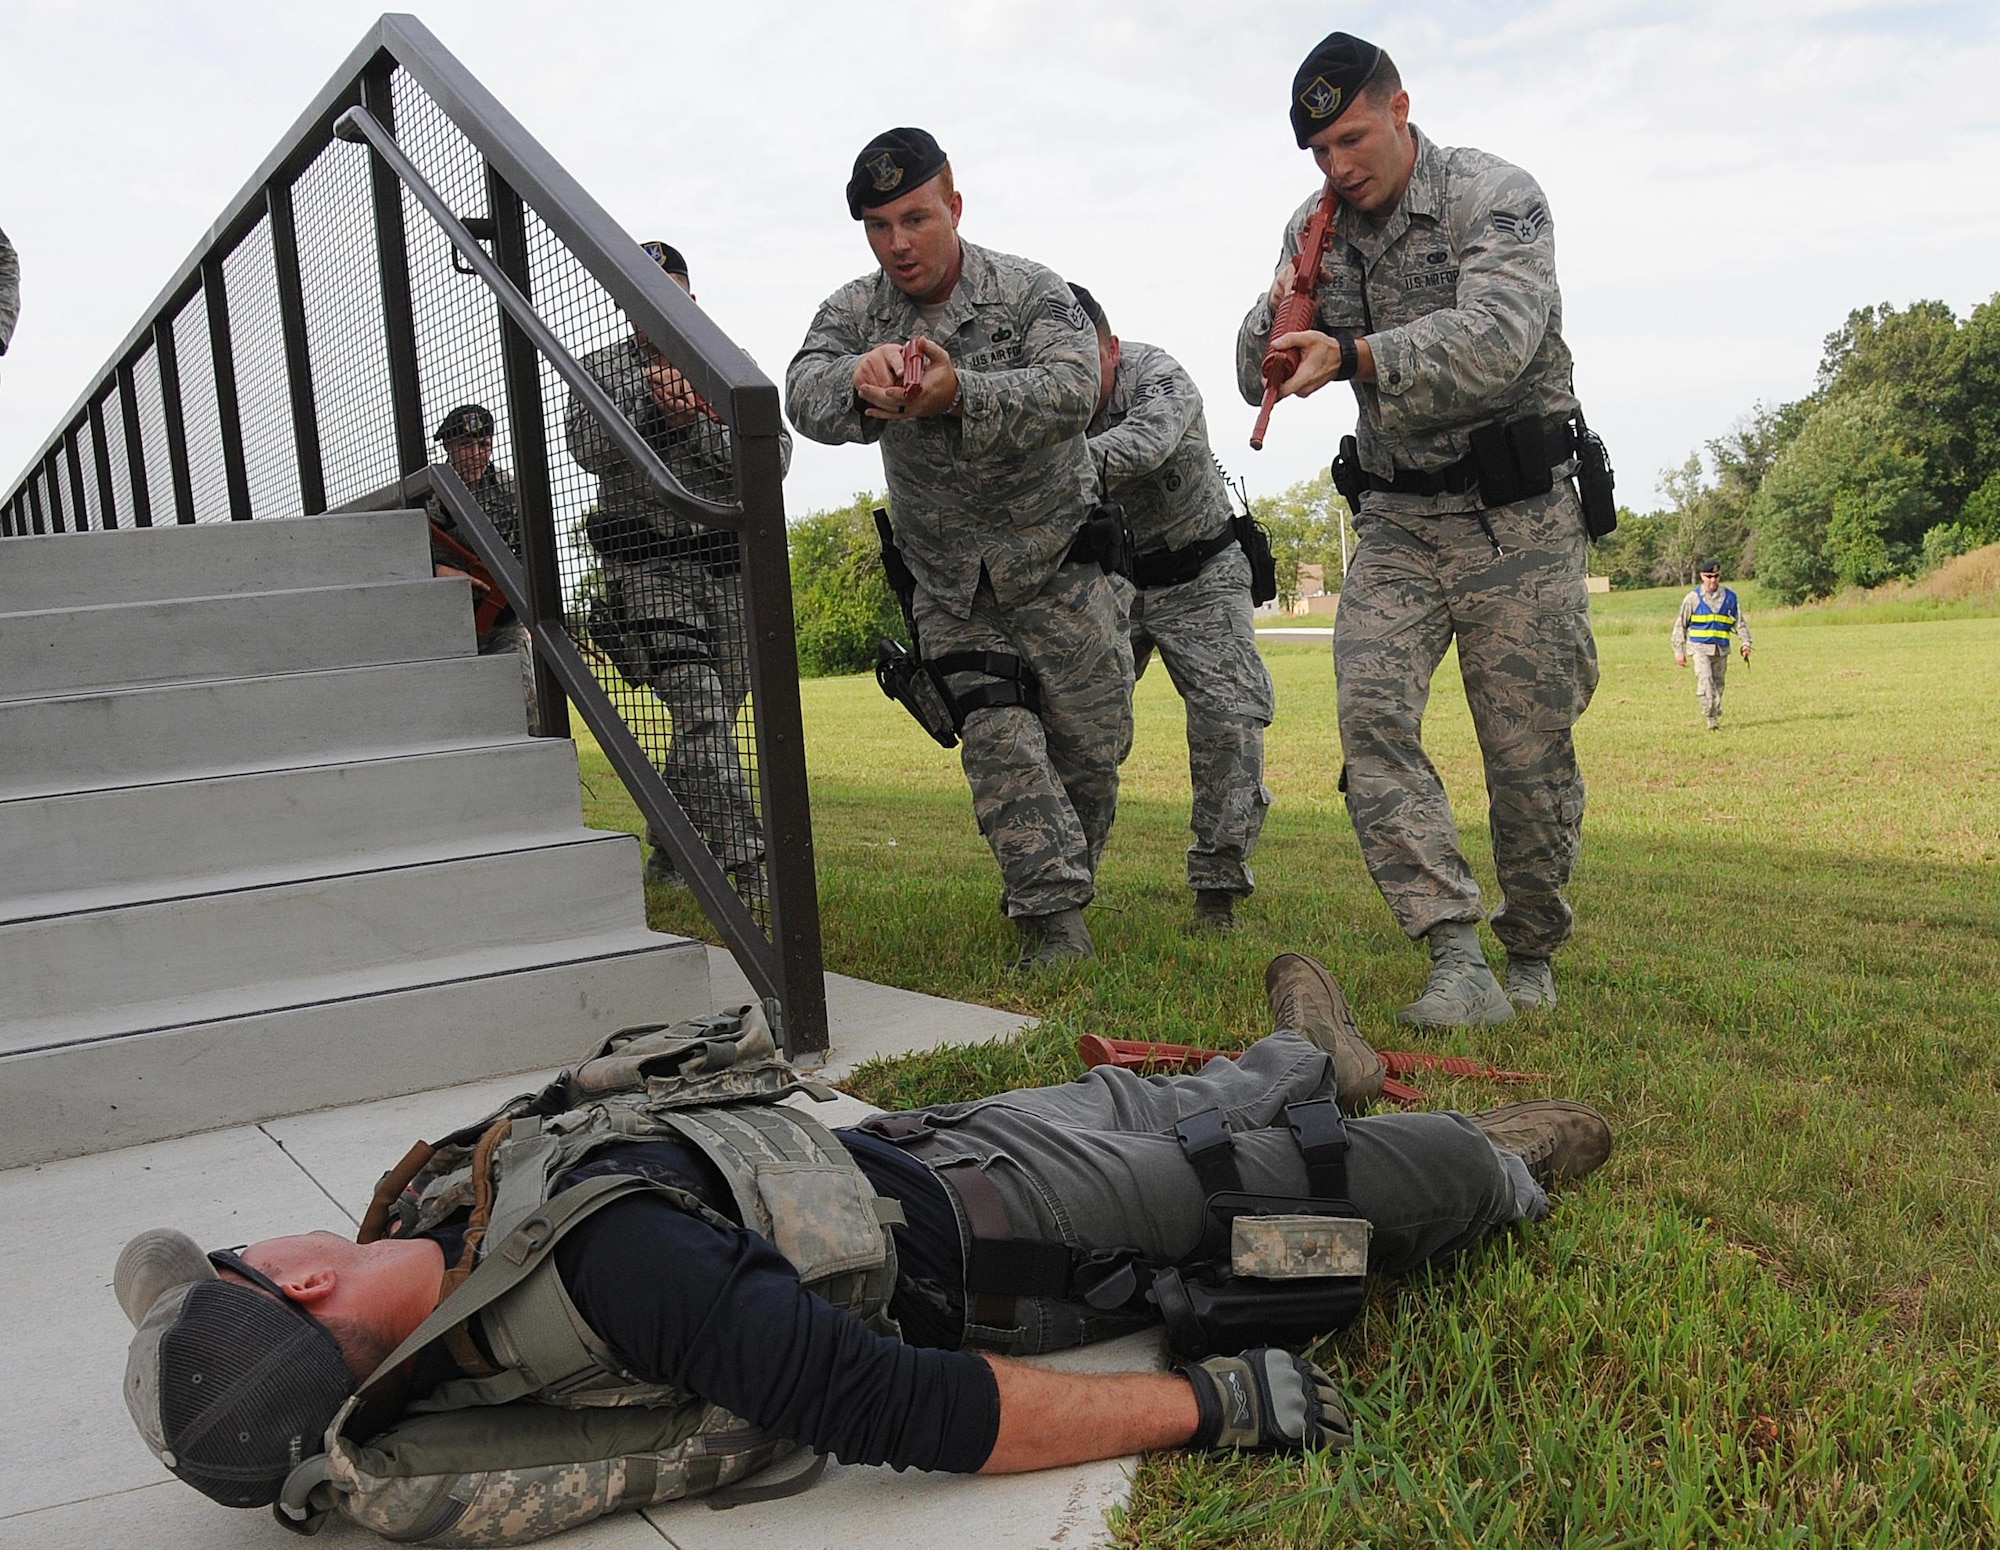 Members of the 509th Security Forces Squadron (SFS) neutralize a scenario during an active shooter exercise at Whiteman Air Force Base, Mo., Aug. 5, 2016. The bi-annual exercise helps Whiteman personnel know, practice and train proper response procedures in order to reduce the risk of harm and provide direction for all base personnel. 